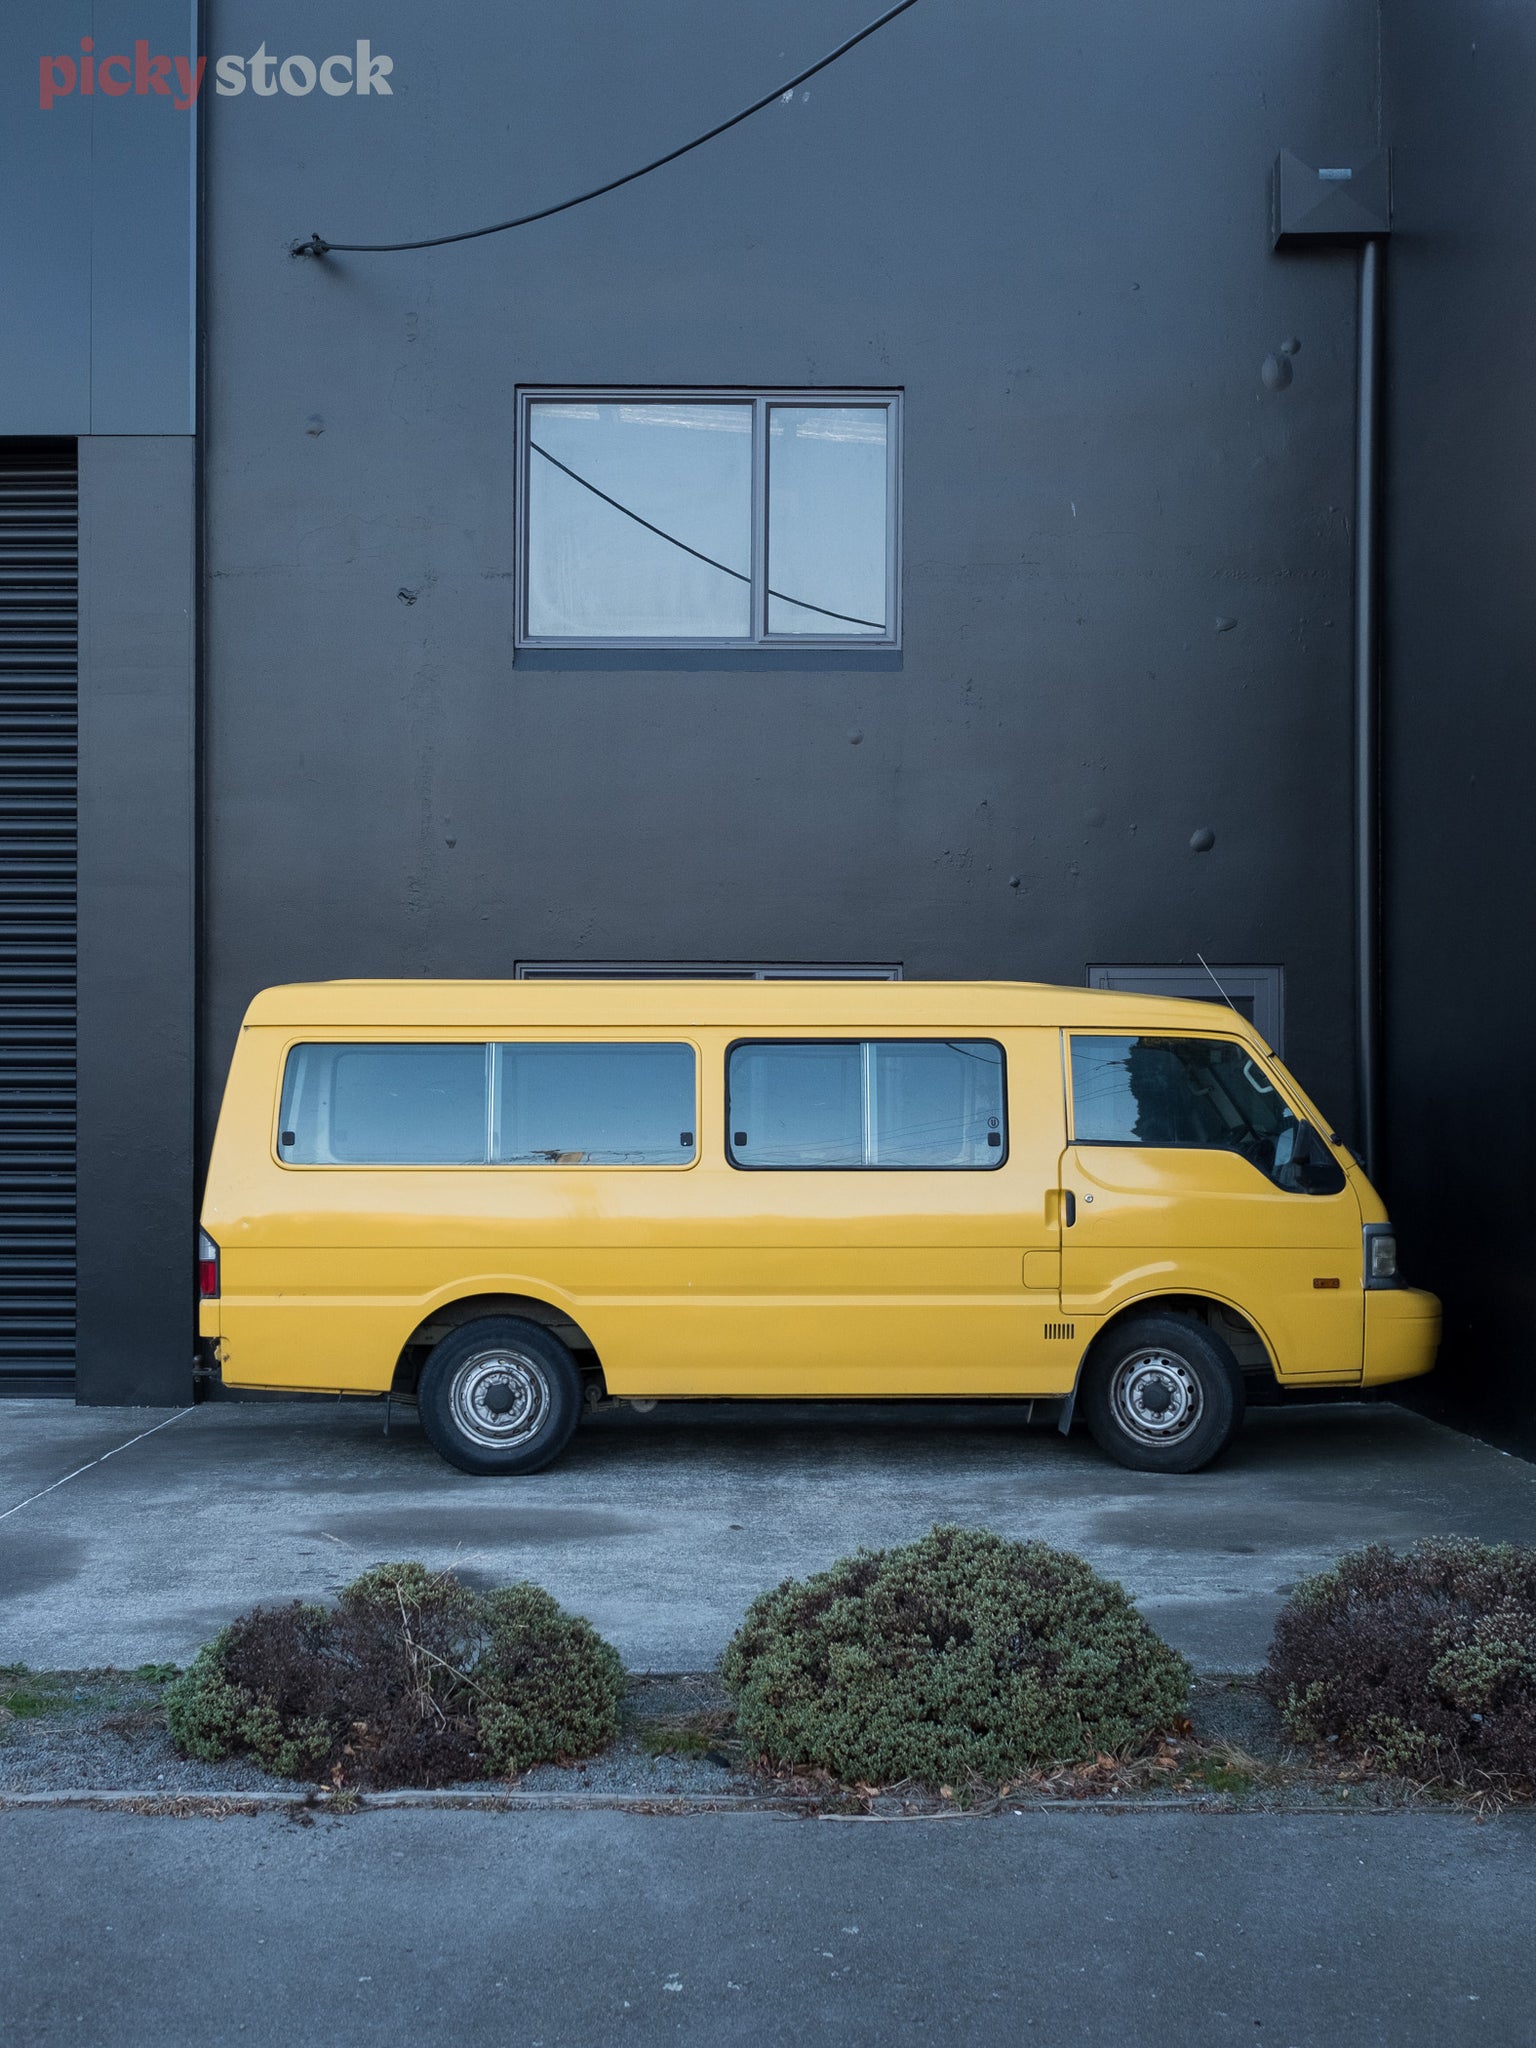 Graphic shot of bright yellow van set against a black-painted concrete building in an urban setting. 